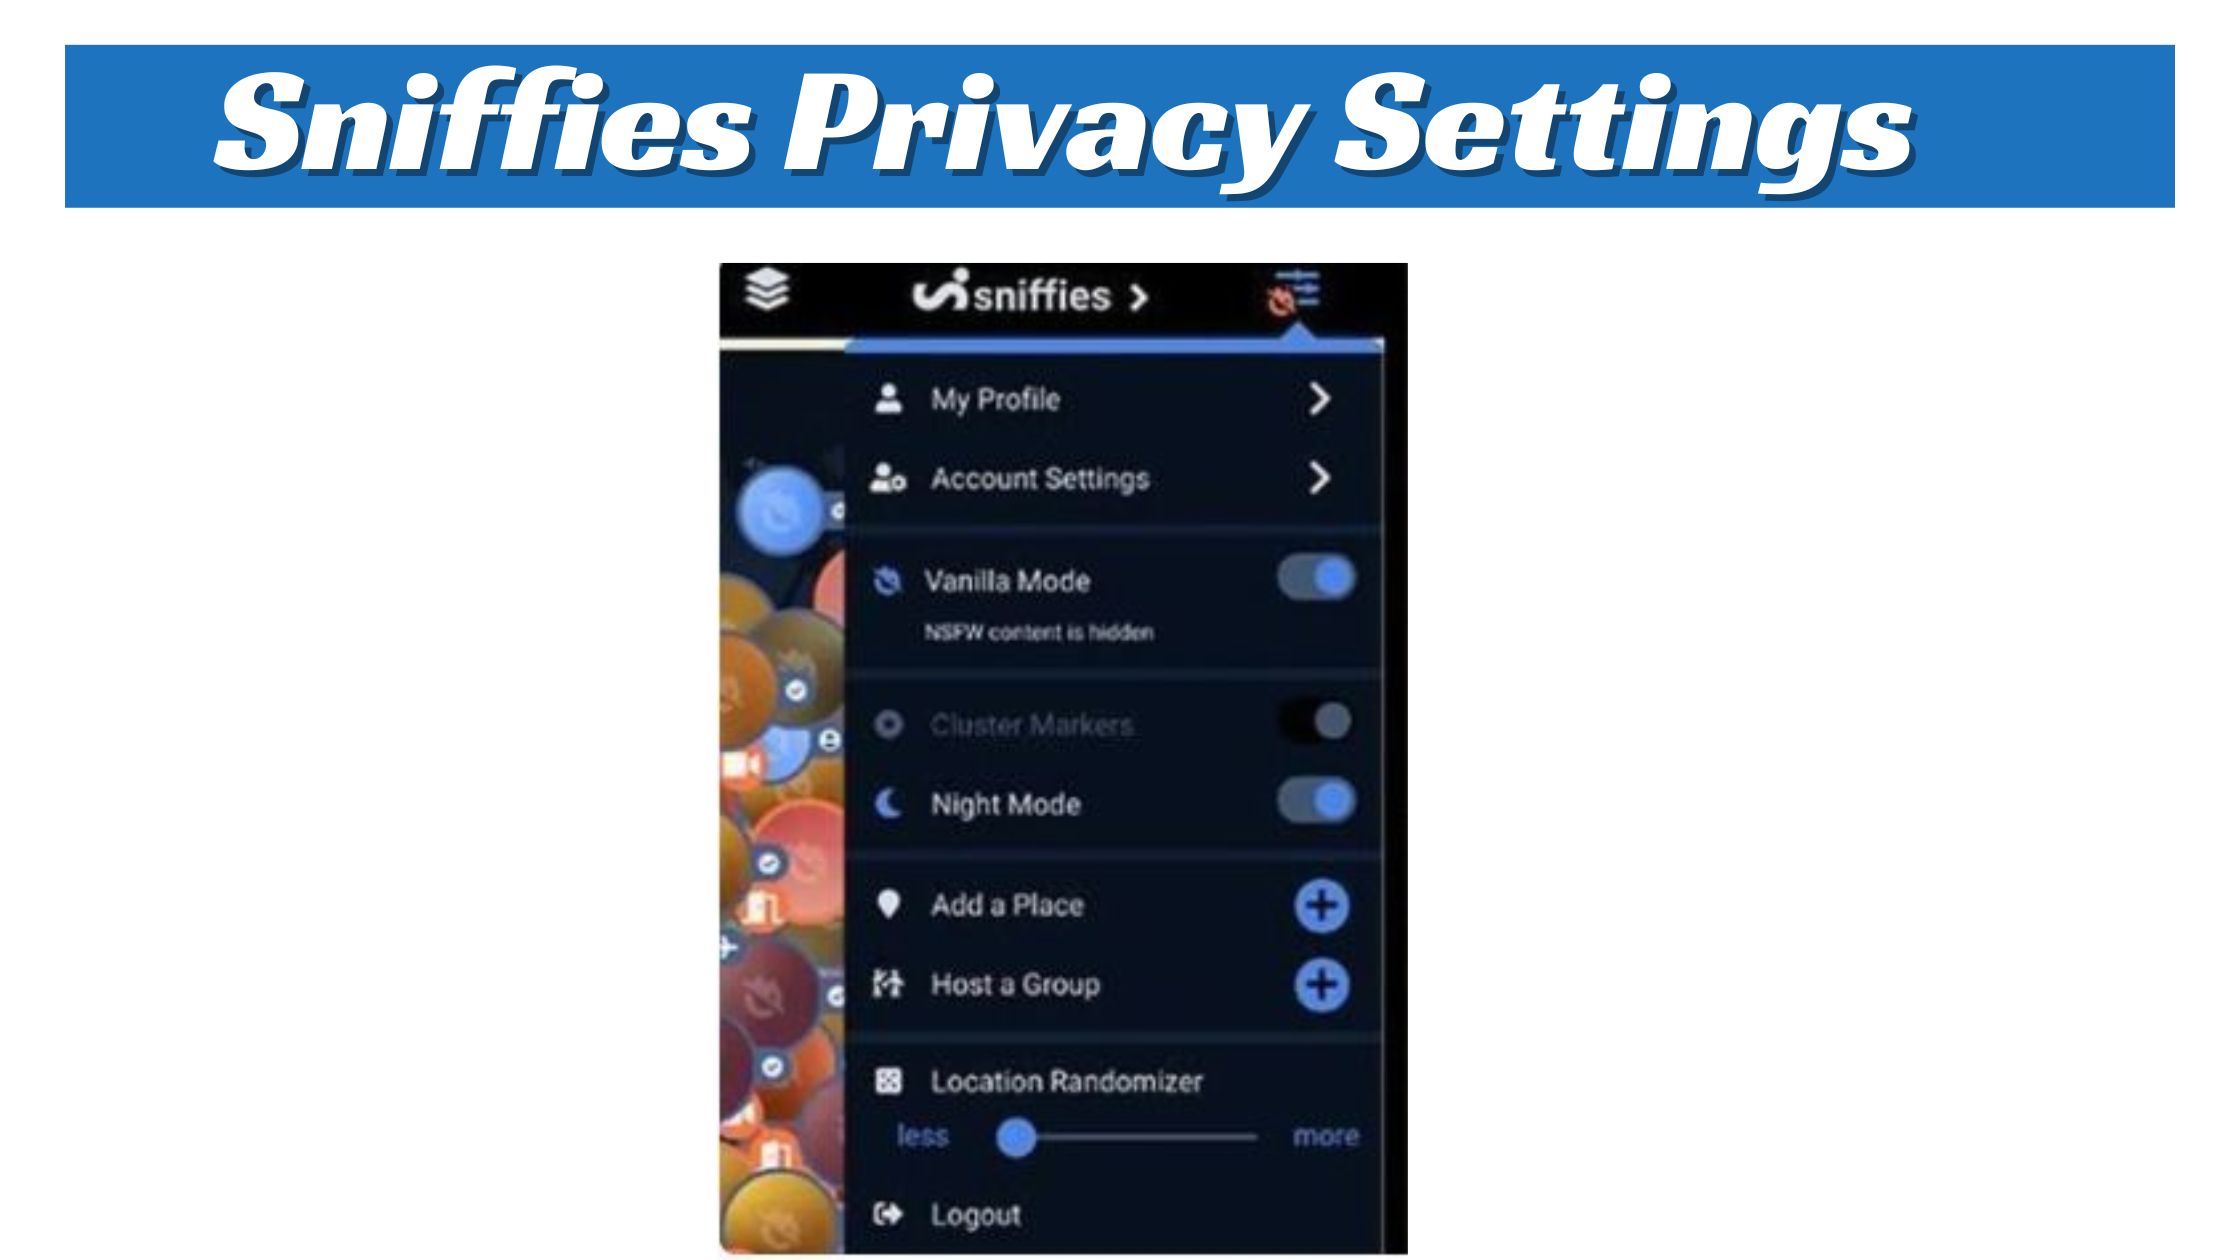 Sniffies Privacy Settings